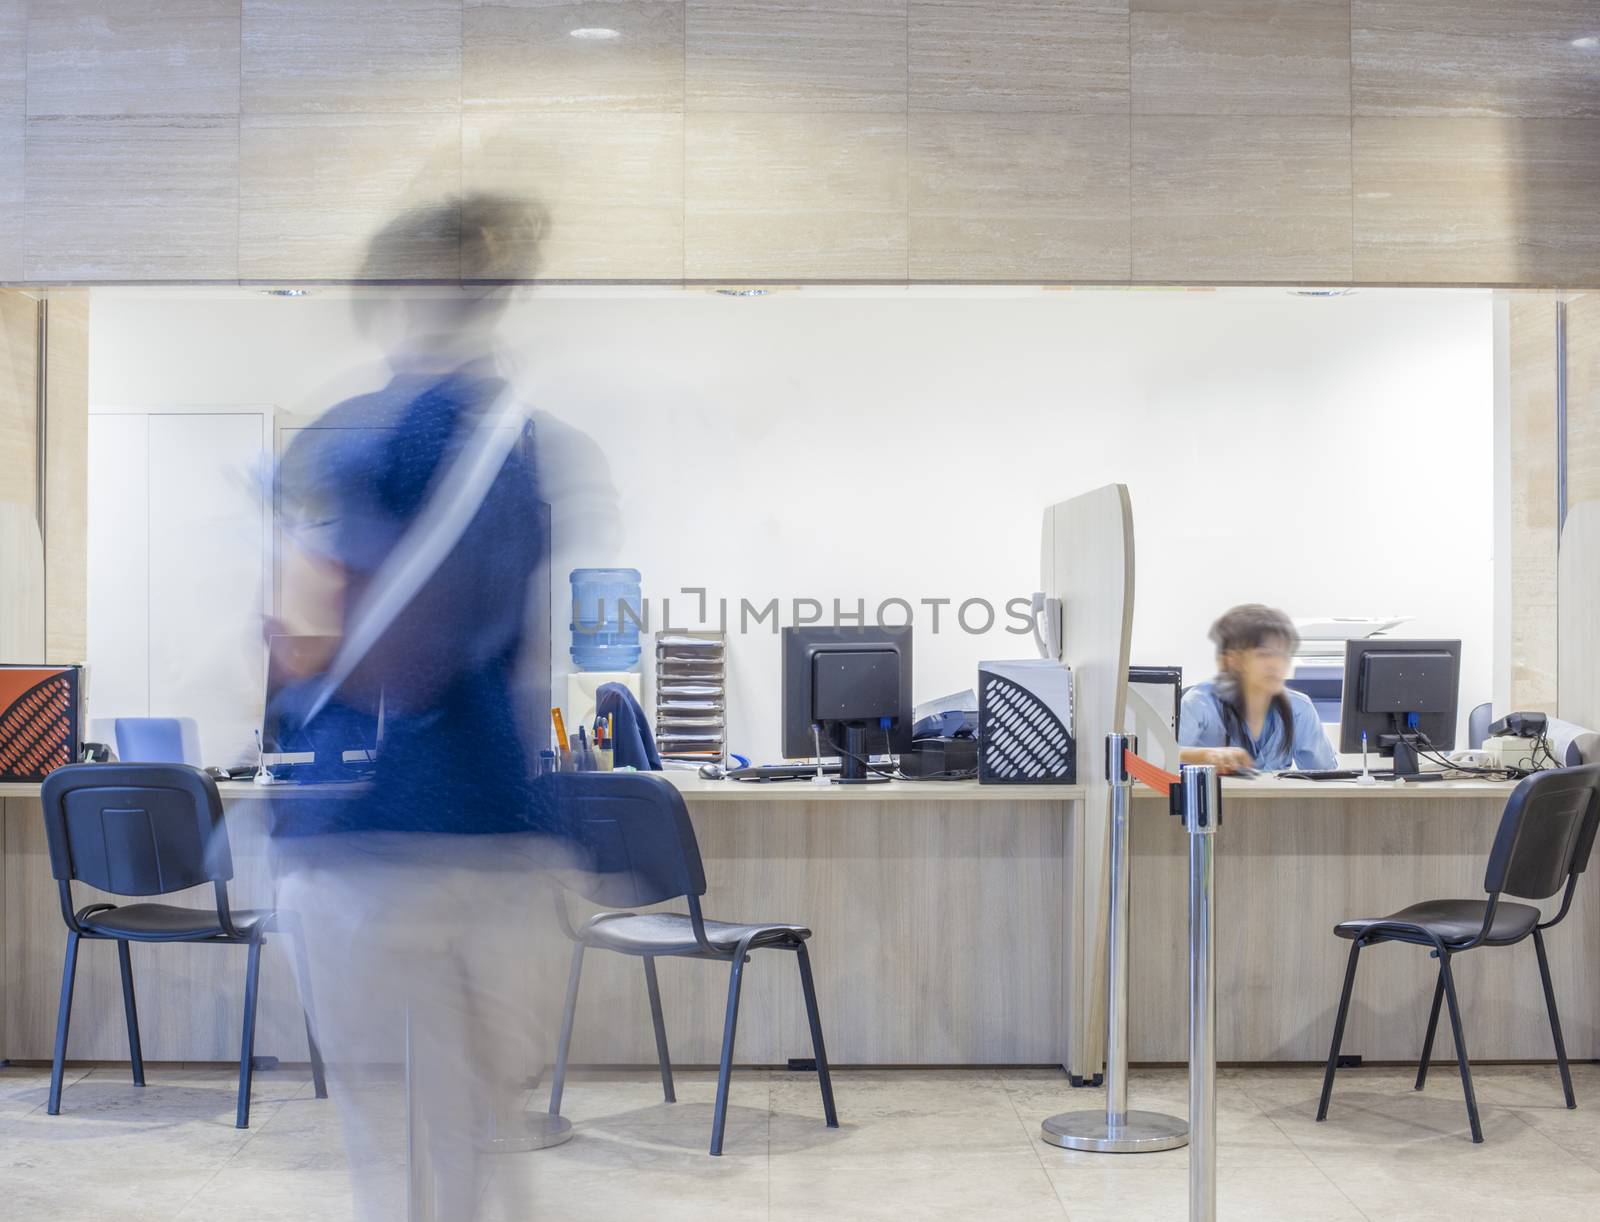 Three seats in front of a Bank, customs, office, hospital, etc. registration desk with blurred figures of a clerk and a customer.